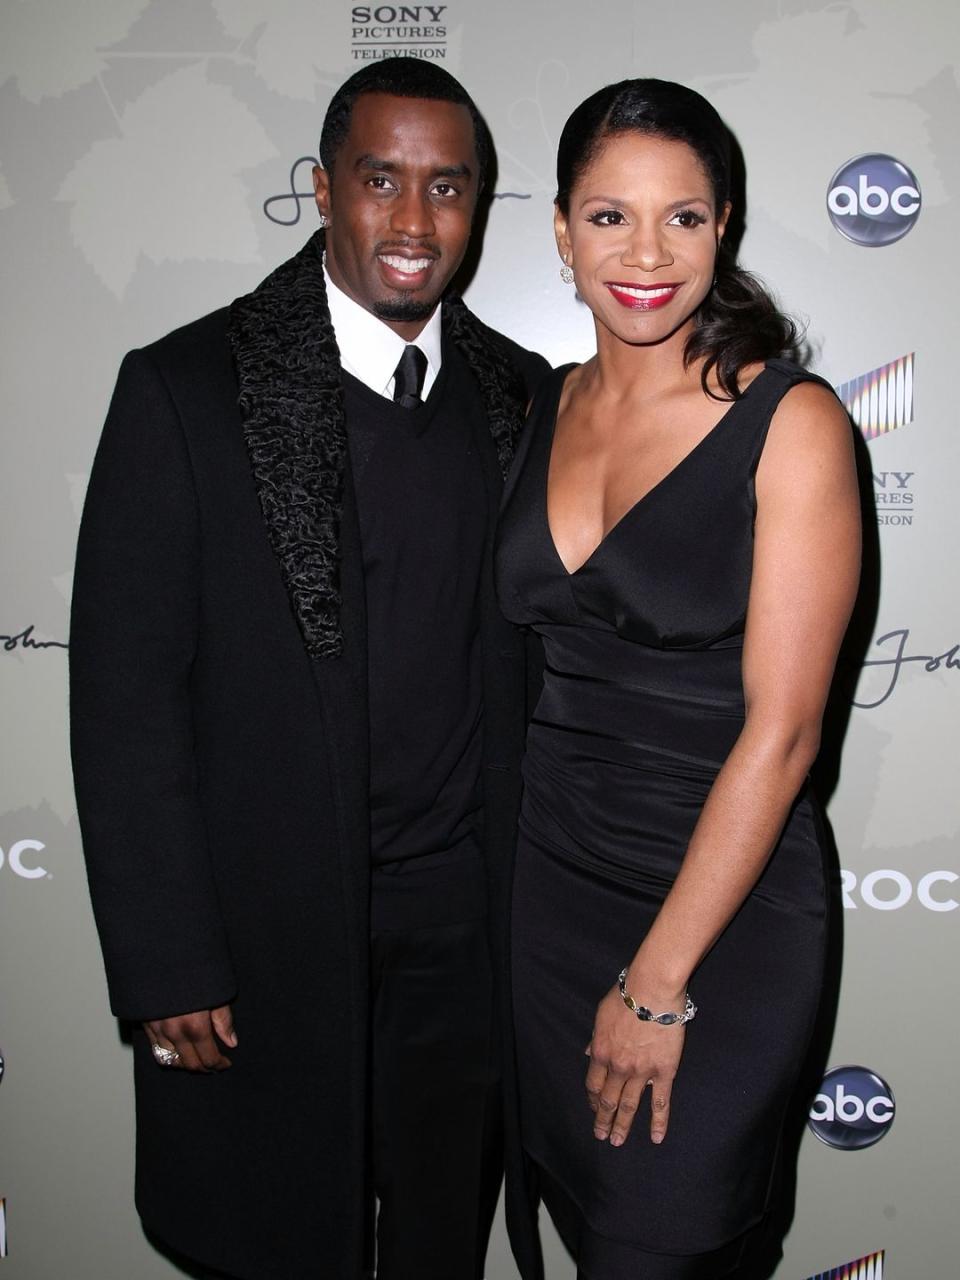 Audra McDonald and Sean "Diddy" Combs